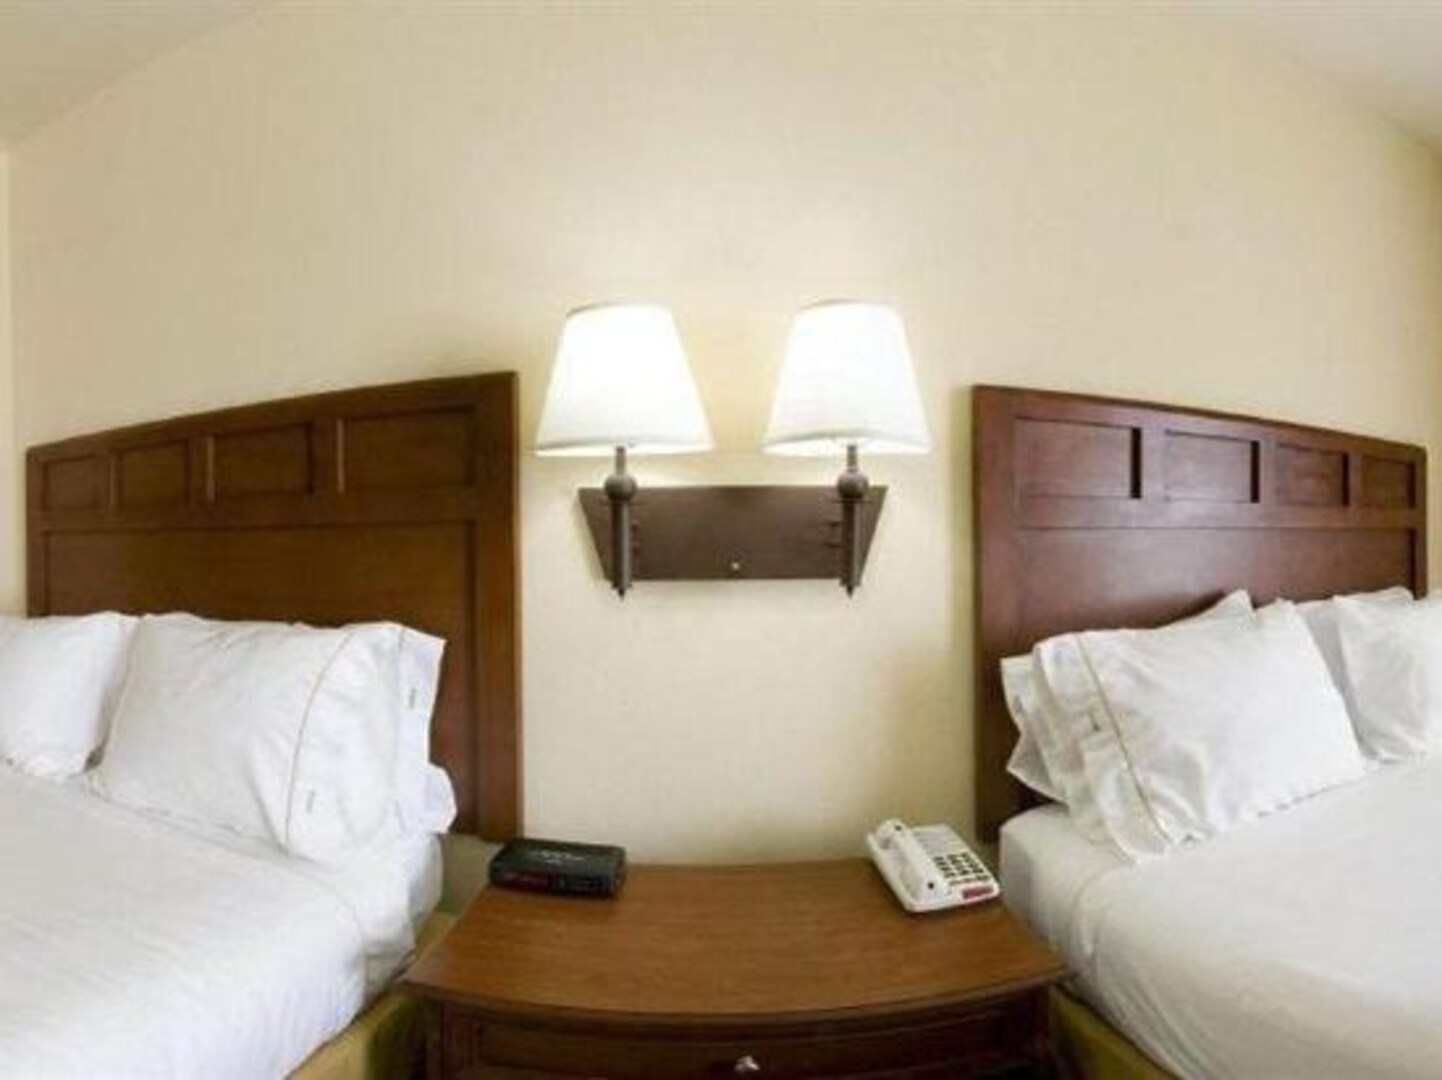 Holiday Inn Express & Suites Levelland, an Ihg Hotel